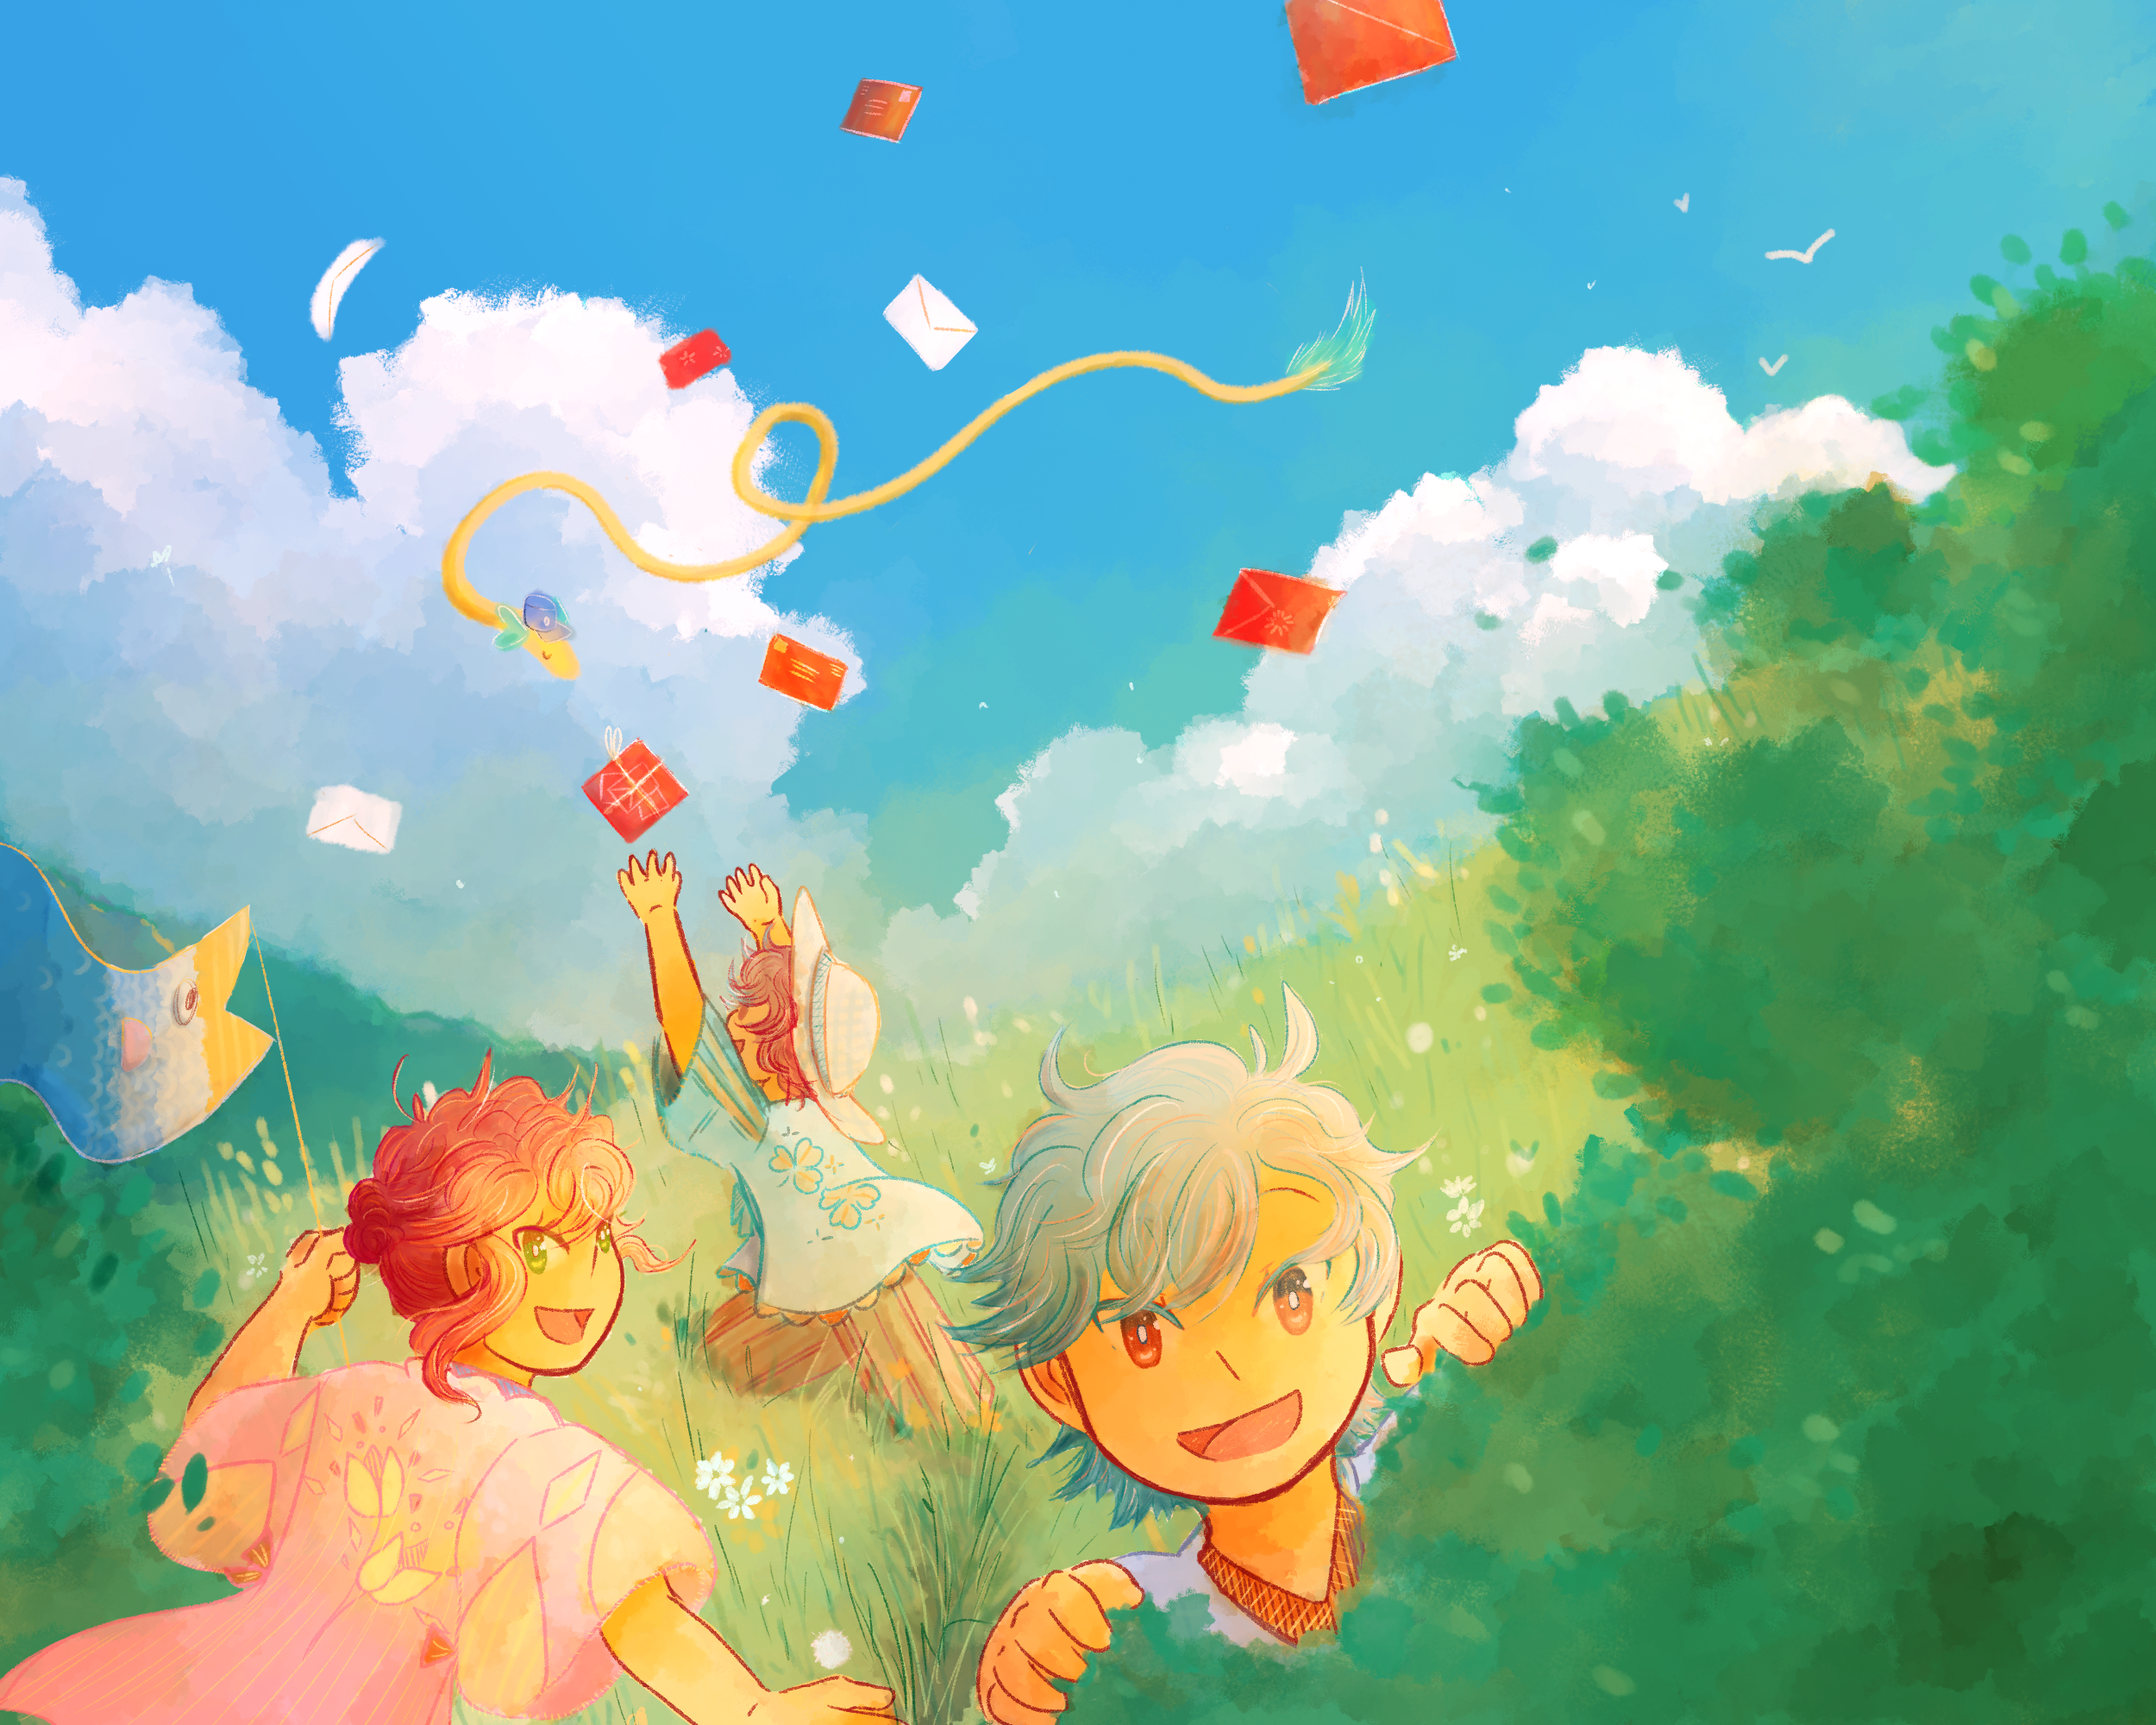 A group of brightly colored children playing in a green field. The bright blue cloudy sky has red and yellow balloons. 